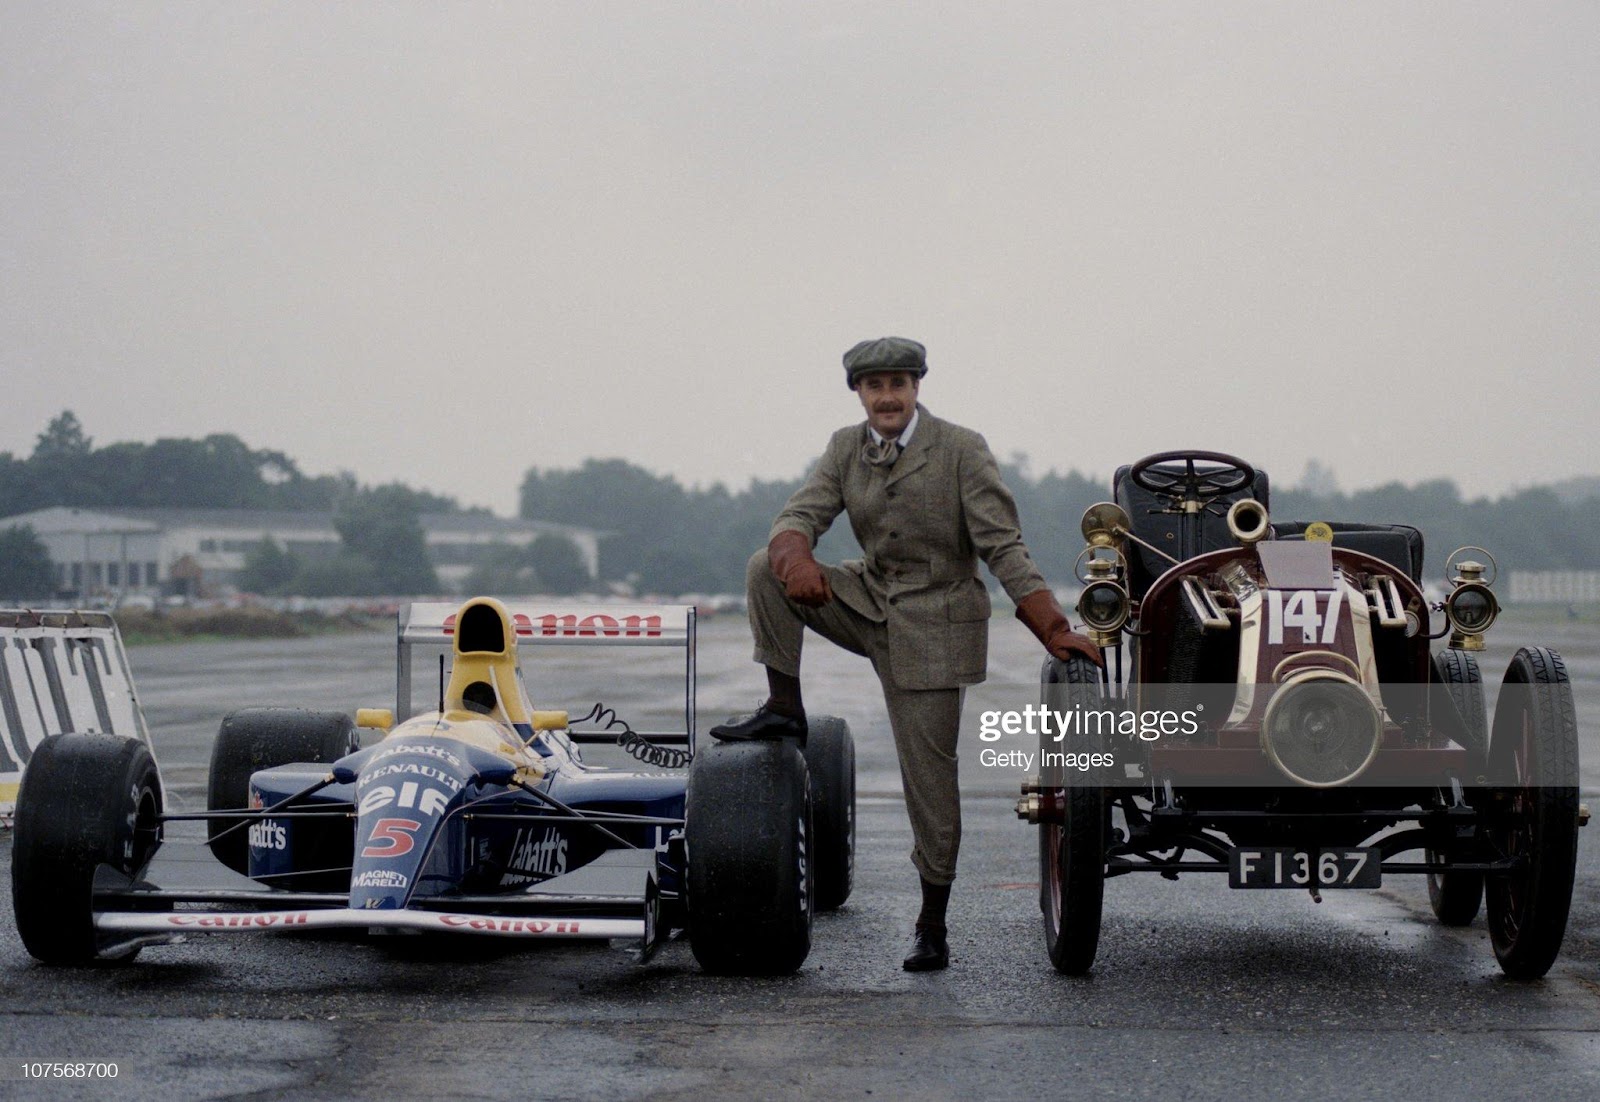 Nigel Mansell, driver of the Canon Williams Renault Williams FW14B Renault 3.5 V10, poses with a 1902 Renault to mark the 85th anniversary of the Brooklands circuit on 9th July 1992 at the Brooklands Circuit in Weybridge, Great Britain.